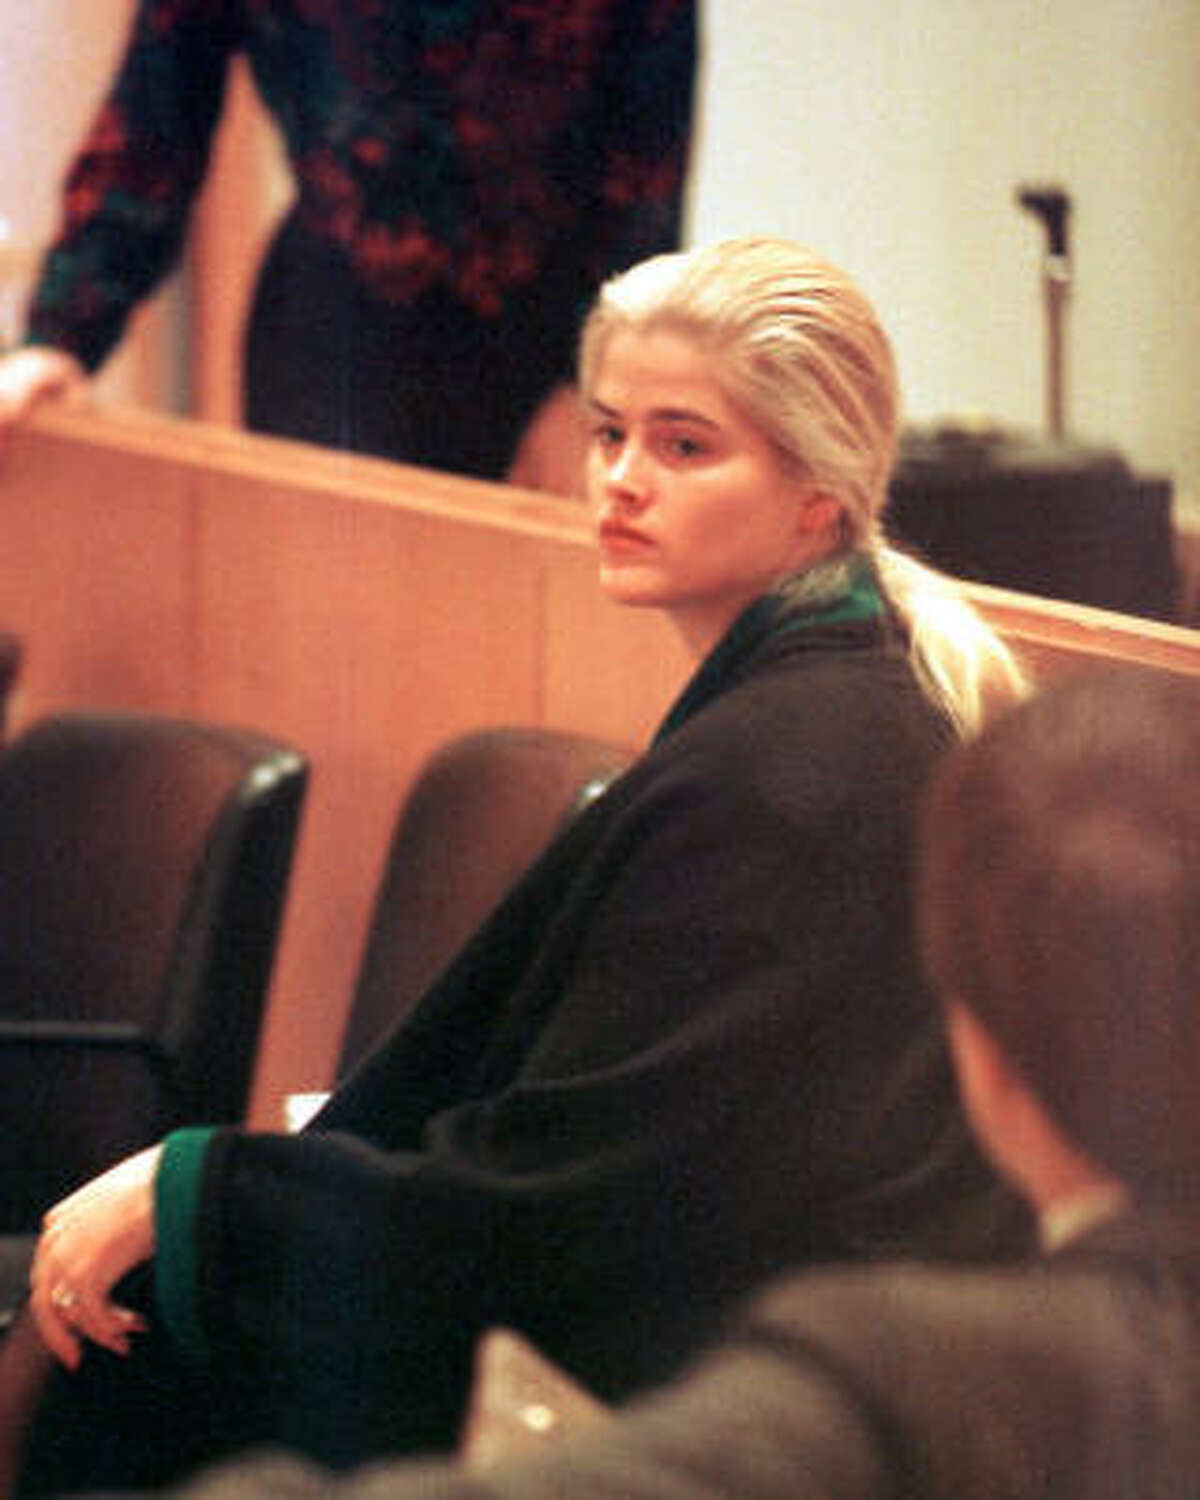 Anna Nicole Smith appears in probate court for a hearing on guardianship of her ailing husband, millionaire J. Howard Marshall, in 1995. She lost.